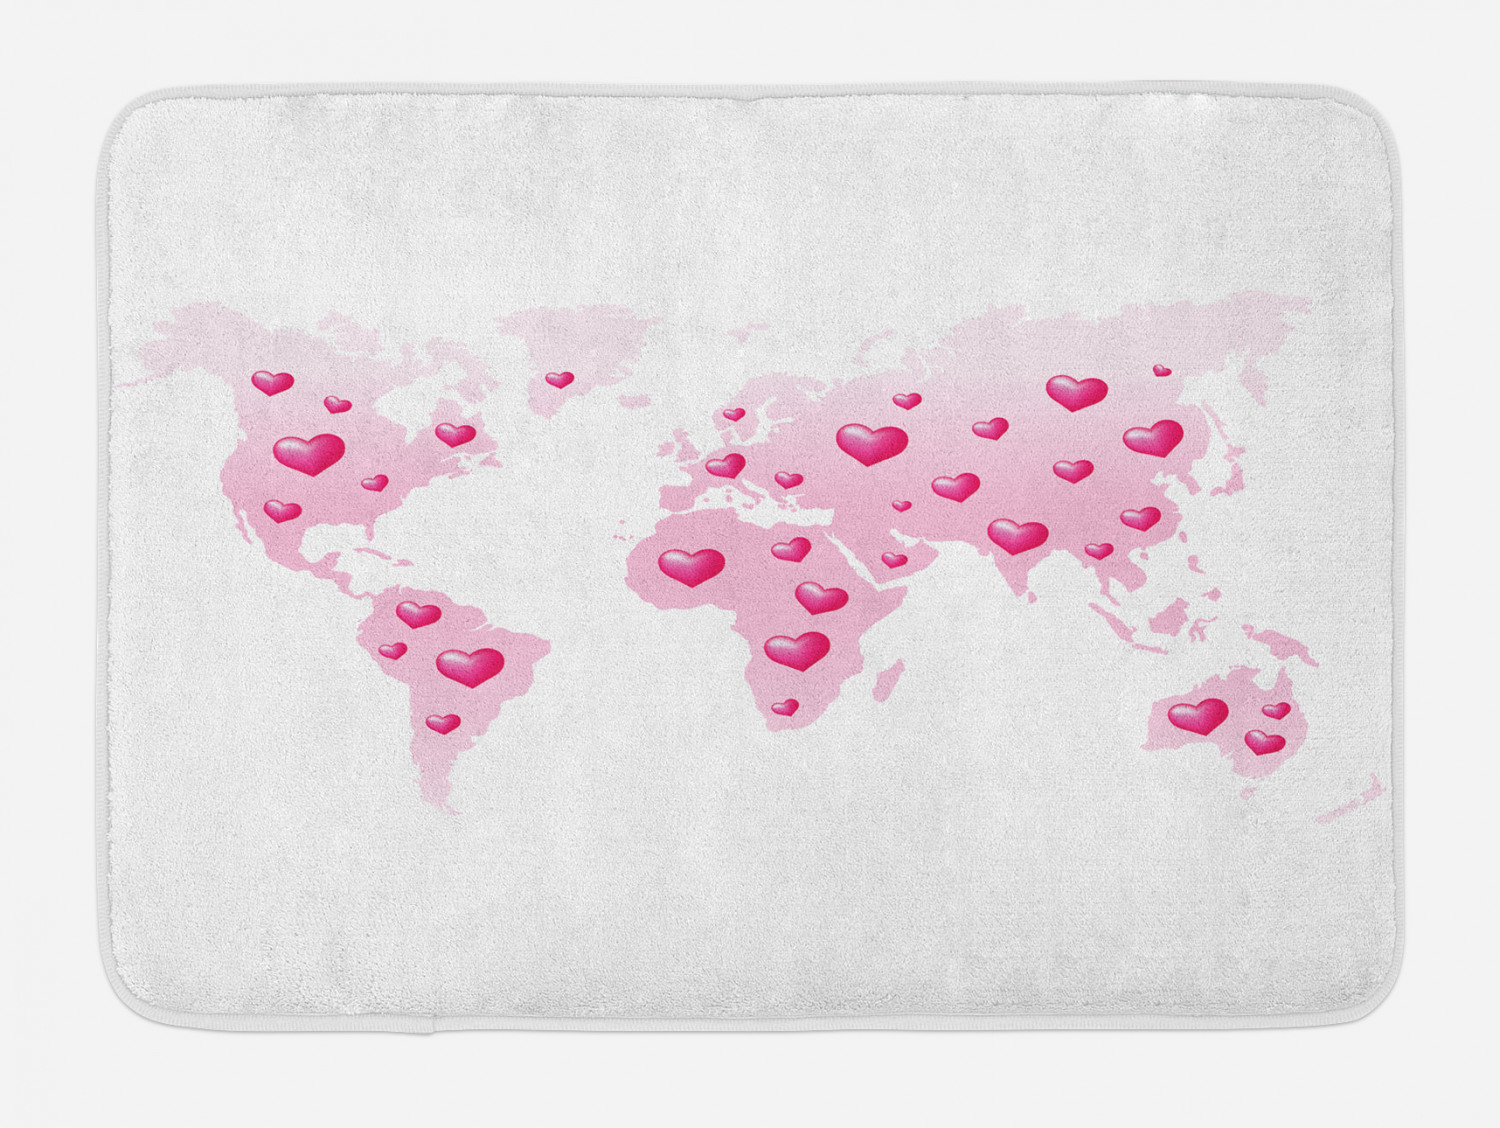 Princess Bath Mat, Global Peace Theme World Map Dotted With Hearts Love Planet Earth, Non-Slip Plush Mat Bathroom Kitchen Laundry Room Decor, 29.5 X 17.5 Inches, Baby Pink White Fuchsia, Ambesonne - image 1 of 2